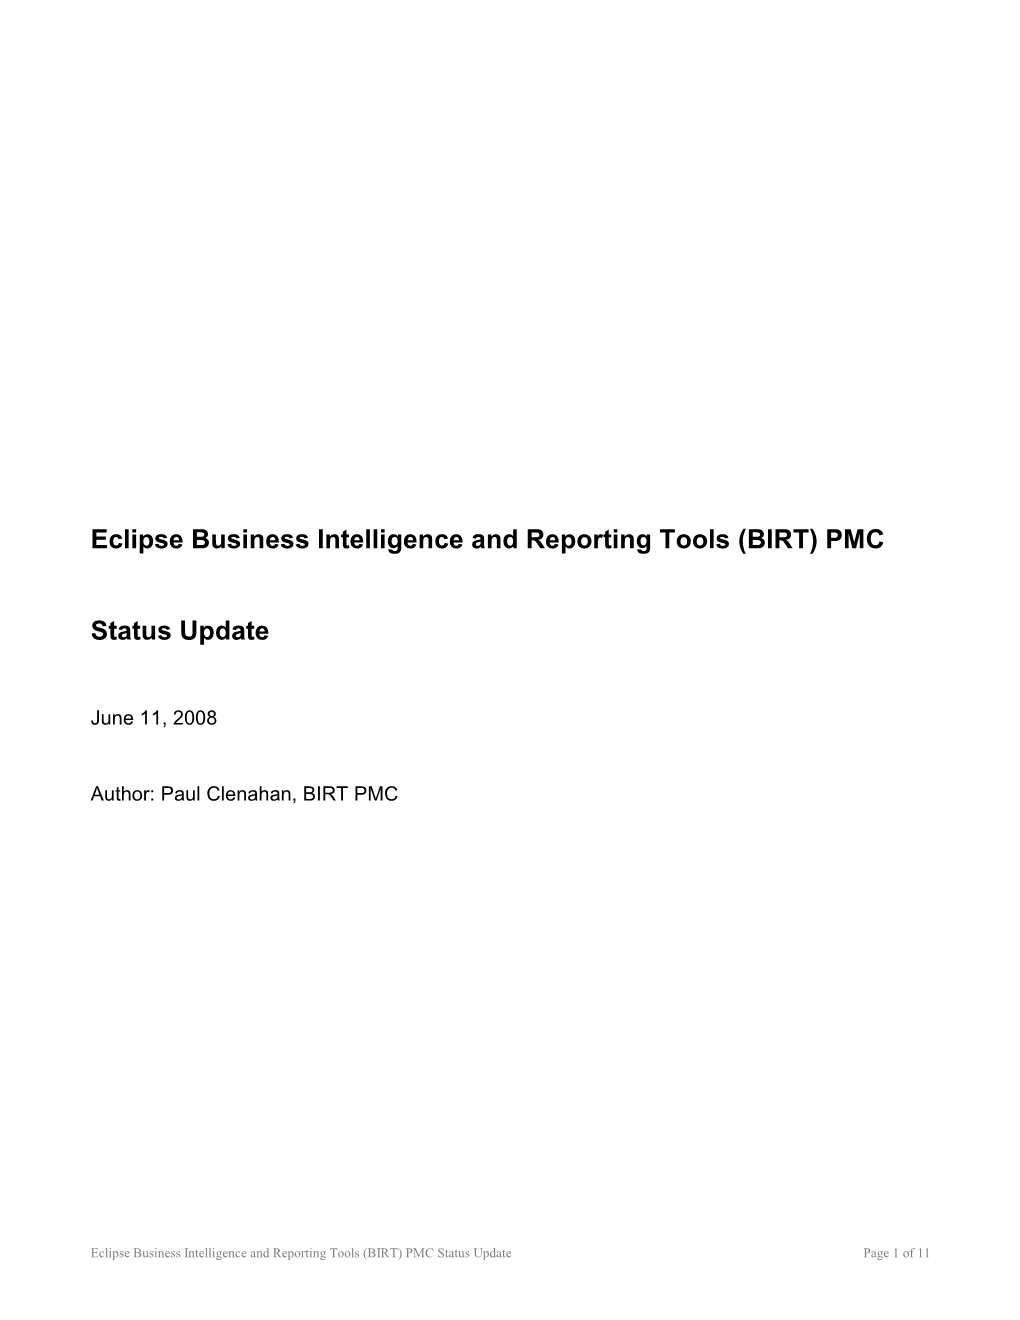 Eclipse Business Intelligence and Reporting Tools (BIRT) Status Update